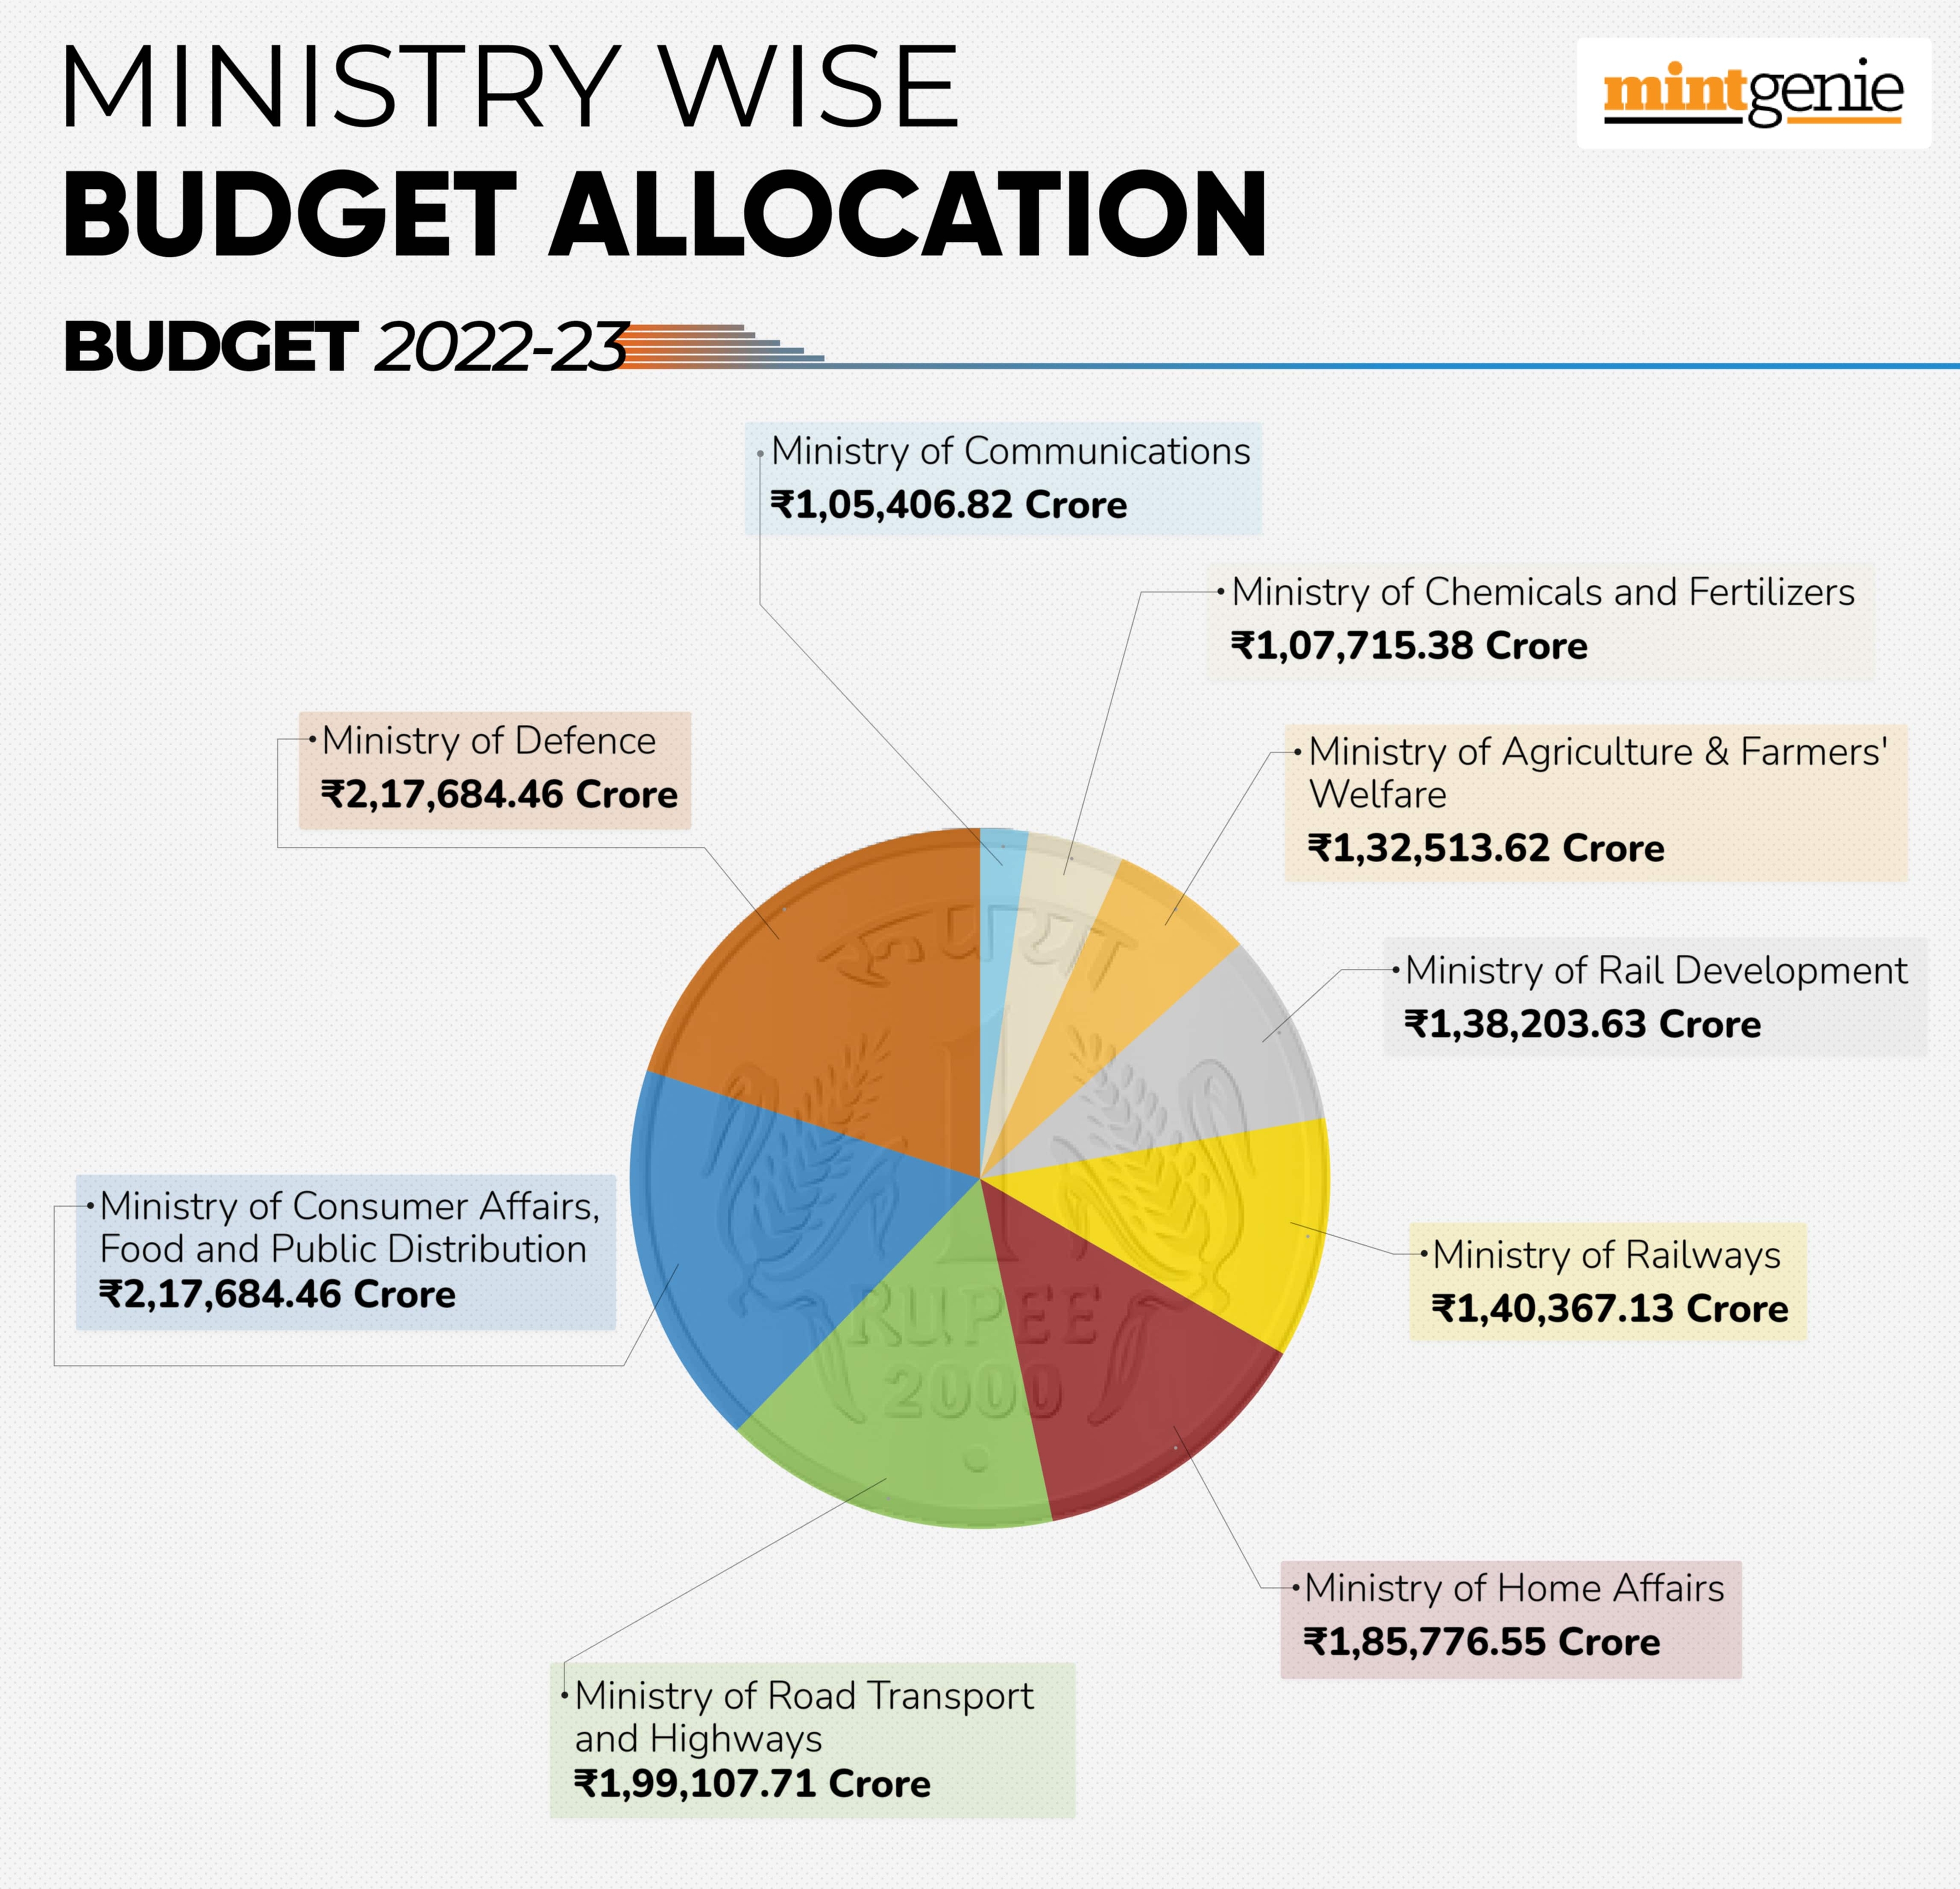 Ministry wise budget allocation